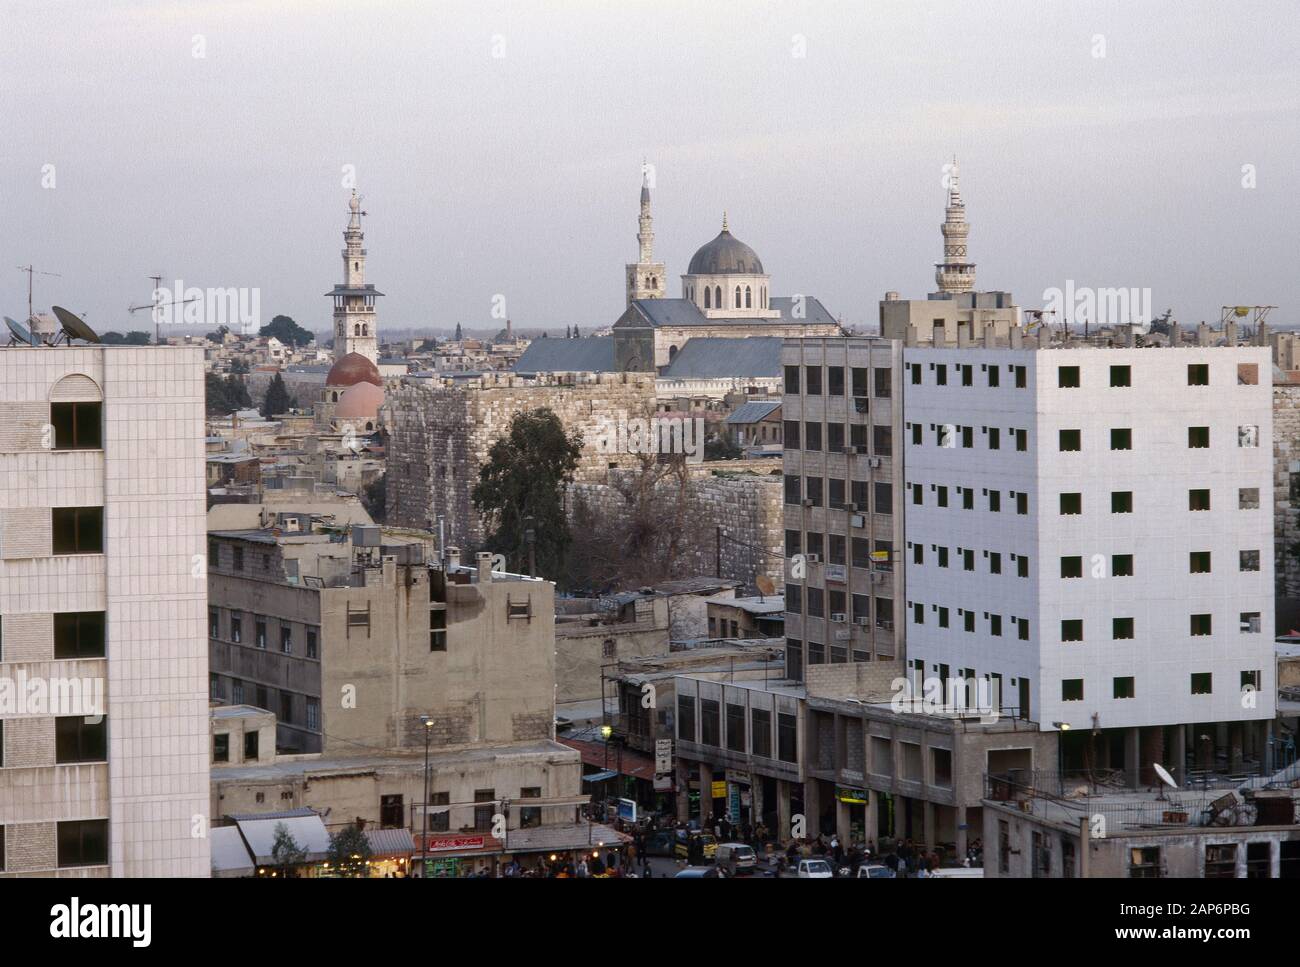 Syrian Arab Republic. Damascus. Aspect of the city at sunset. Photo taken before the Syrian CIvil War. Stock Photo